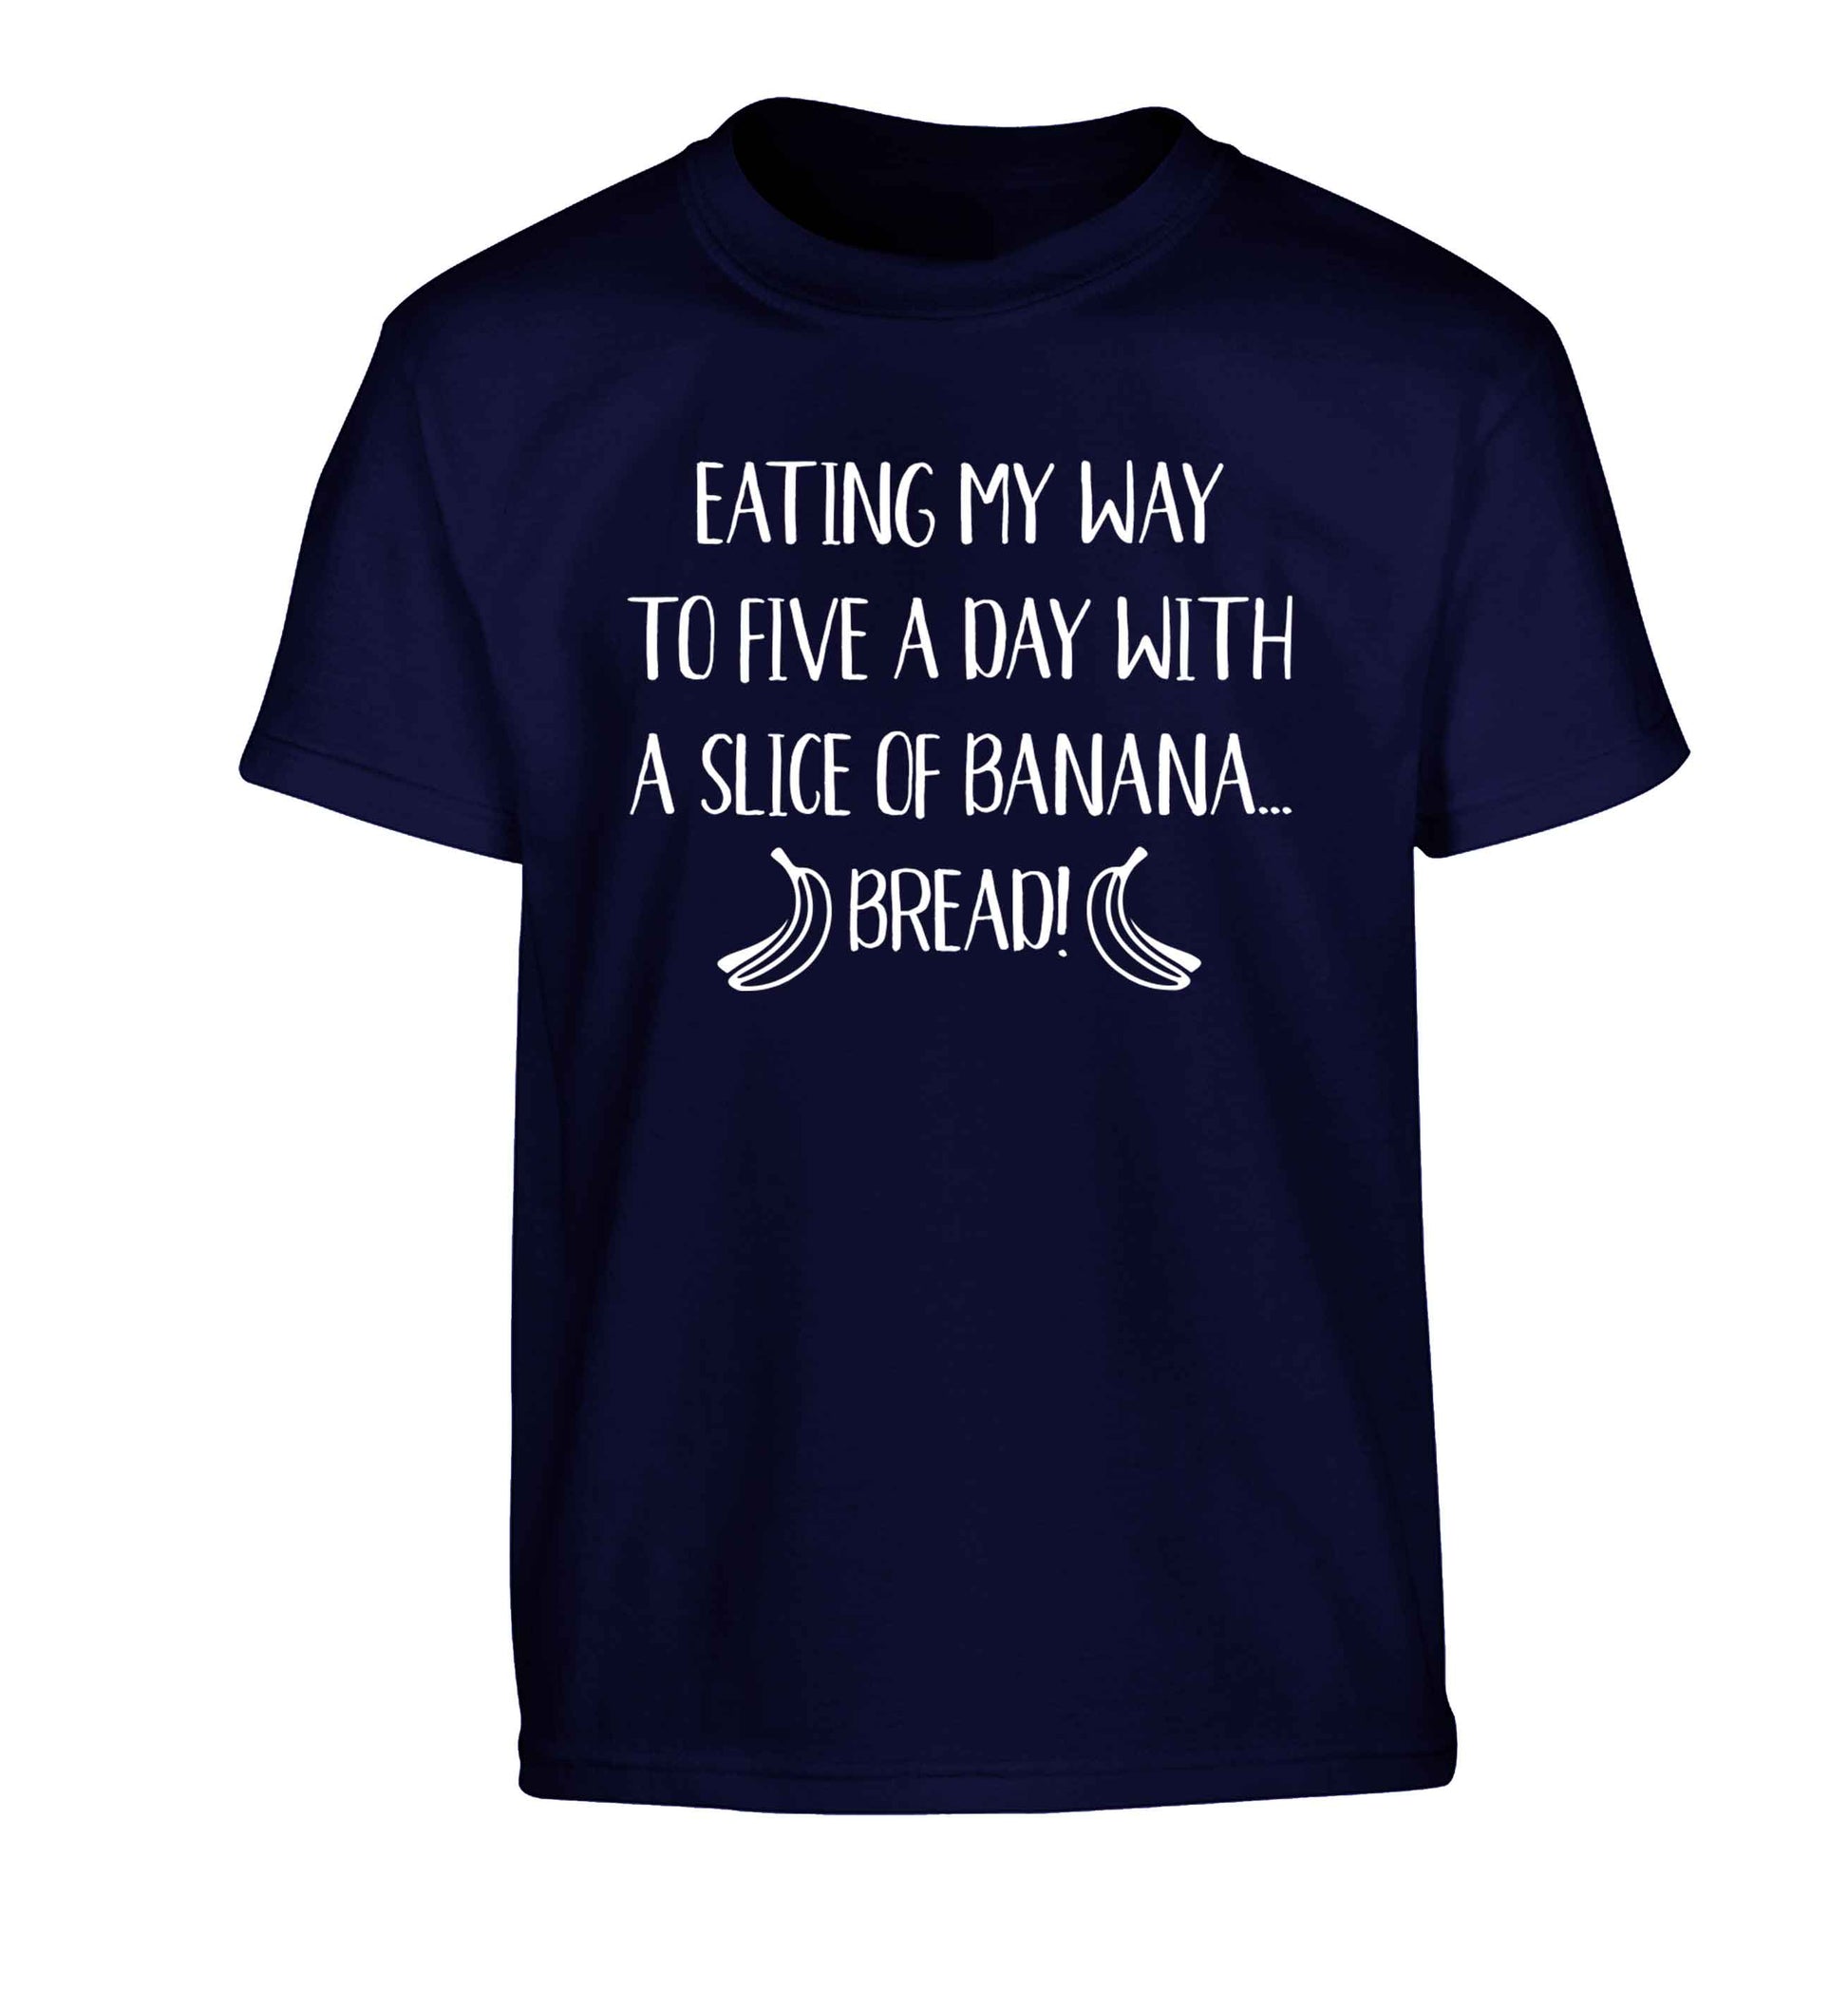 Eating my way to five a day with a slice of banana bread Children's navy Tshirt 12-13 Years